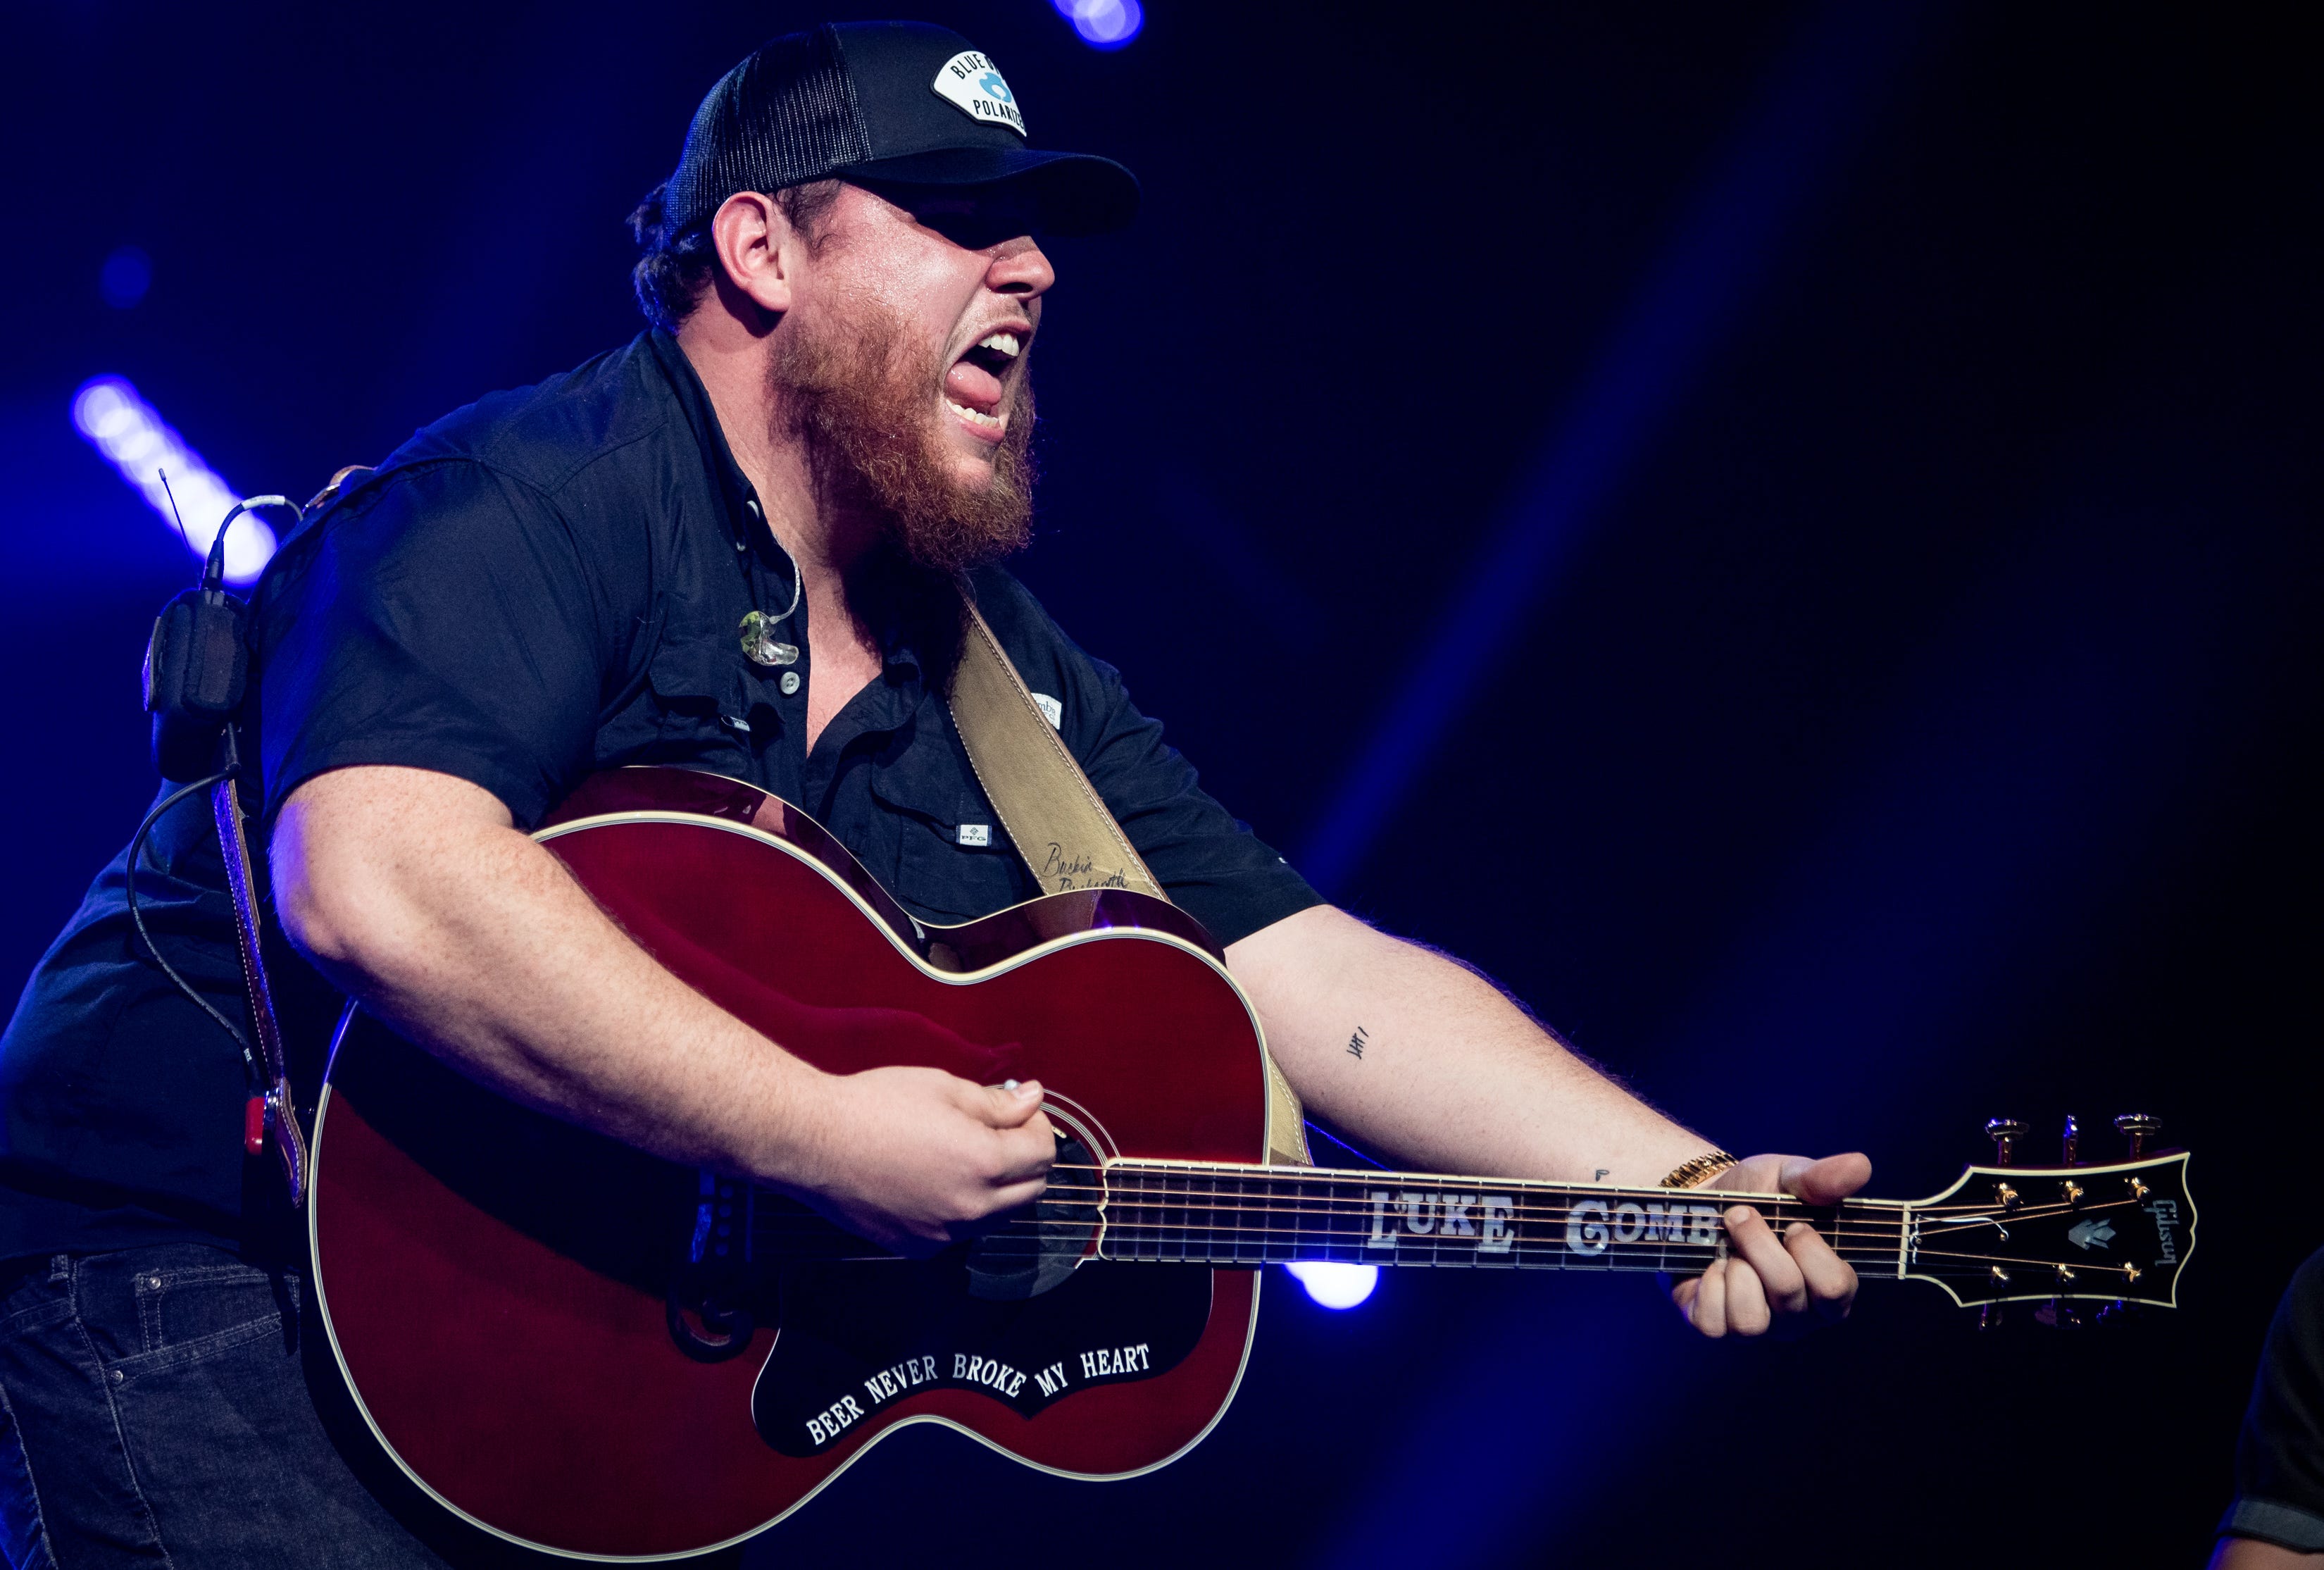 Luke Combs positive for COVID19, will miss CMT Awards performance